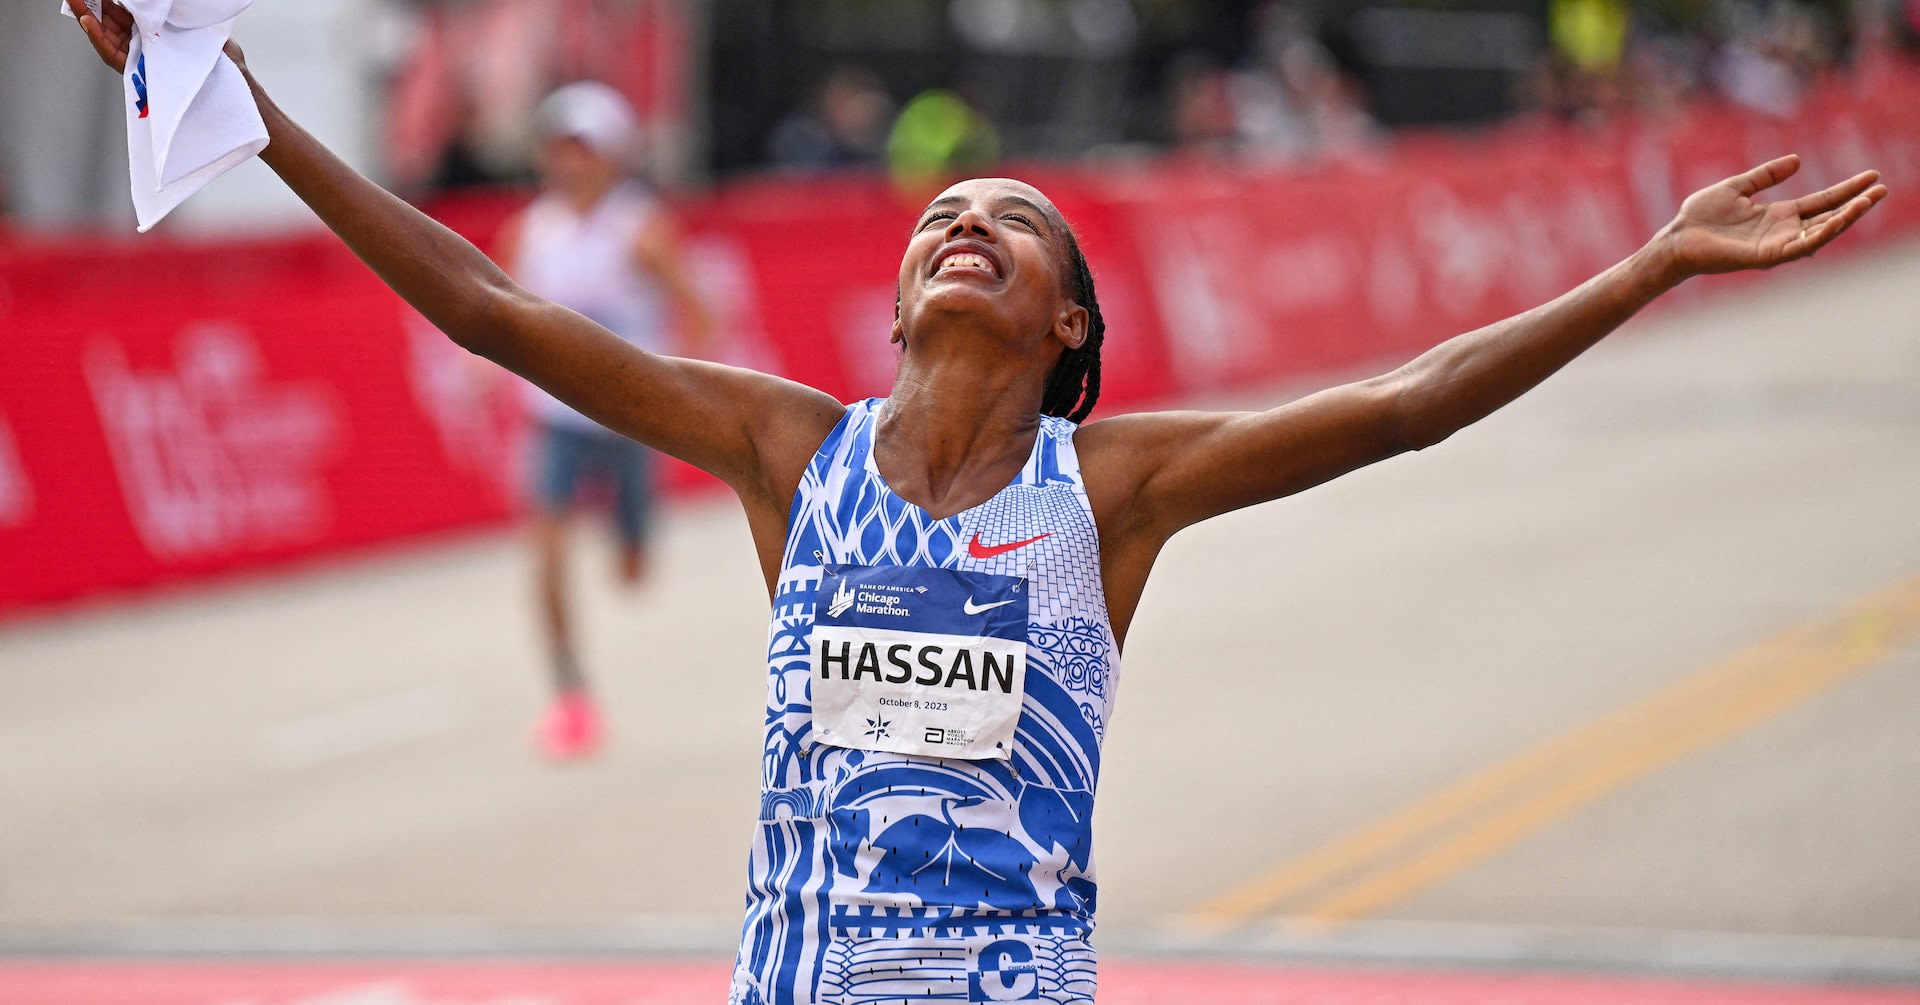 Hassan entered for four races in Paris